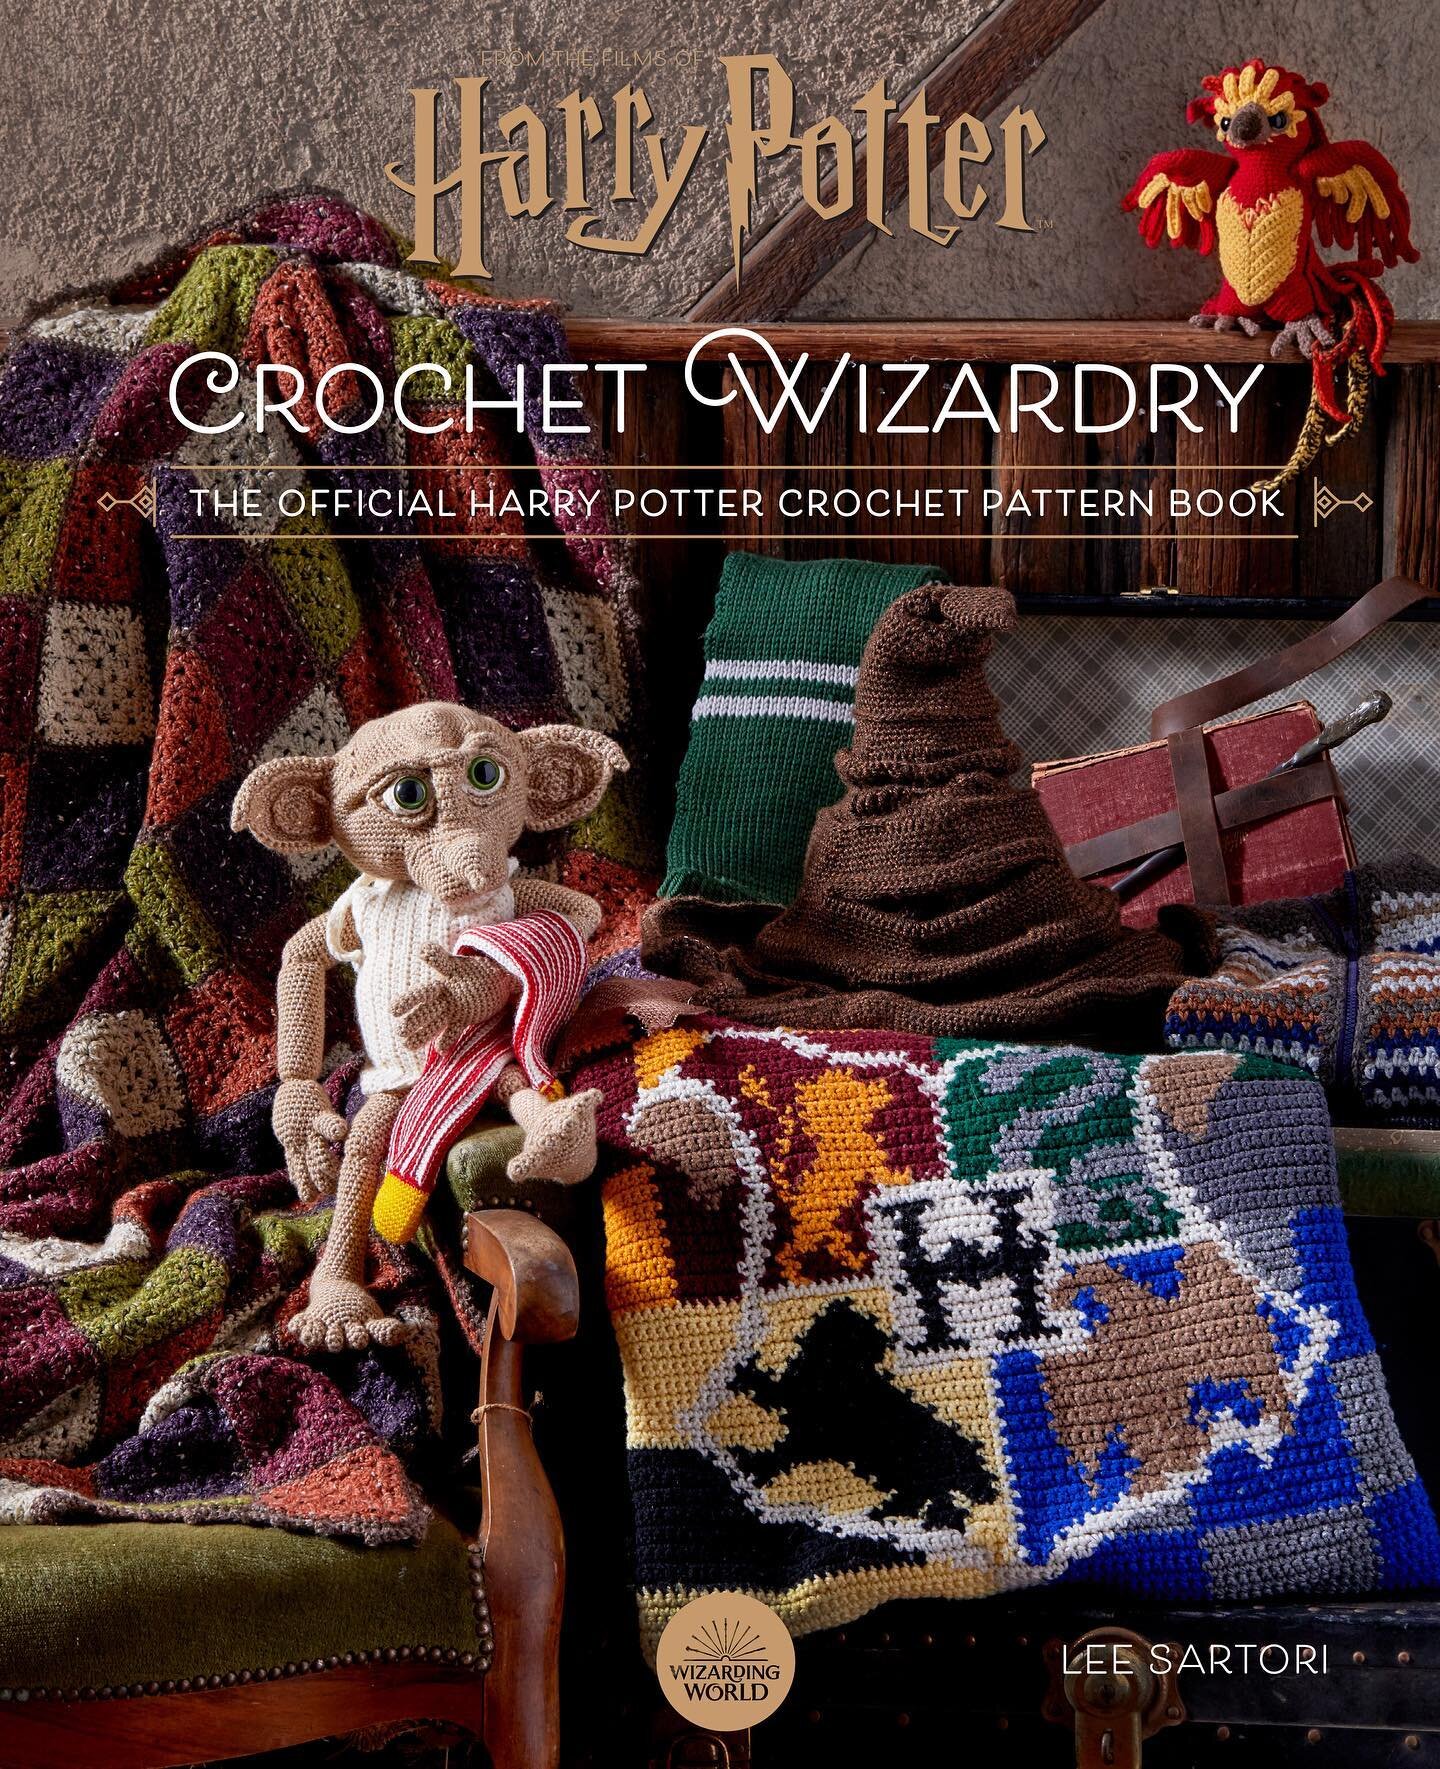 Overjoyed and Excitement Levels: TO THE MOON!
✨
I'm so excited to have not 1, BUT TWO projects in the new book Harry Potter Crochet Wizardry on sale August 17th! I designed a dark arts inspired sweater called the &ldquo;Unbreakable Vow Sweater&rdquo;